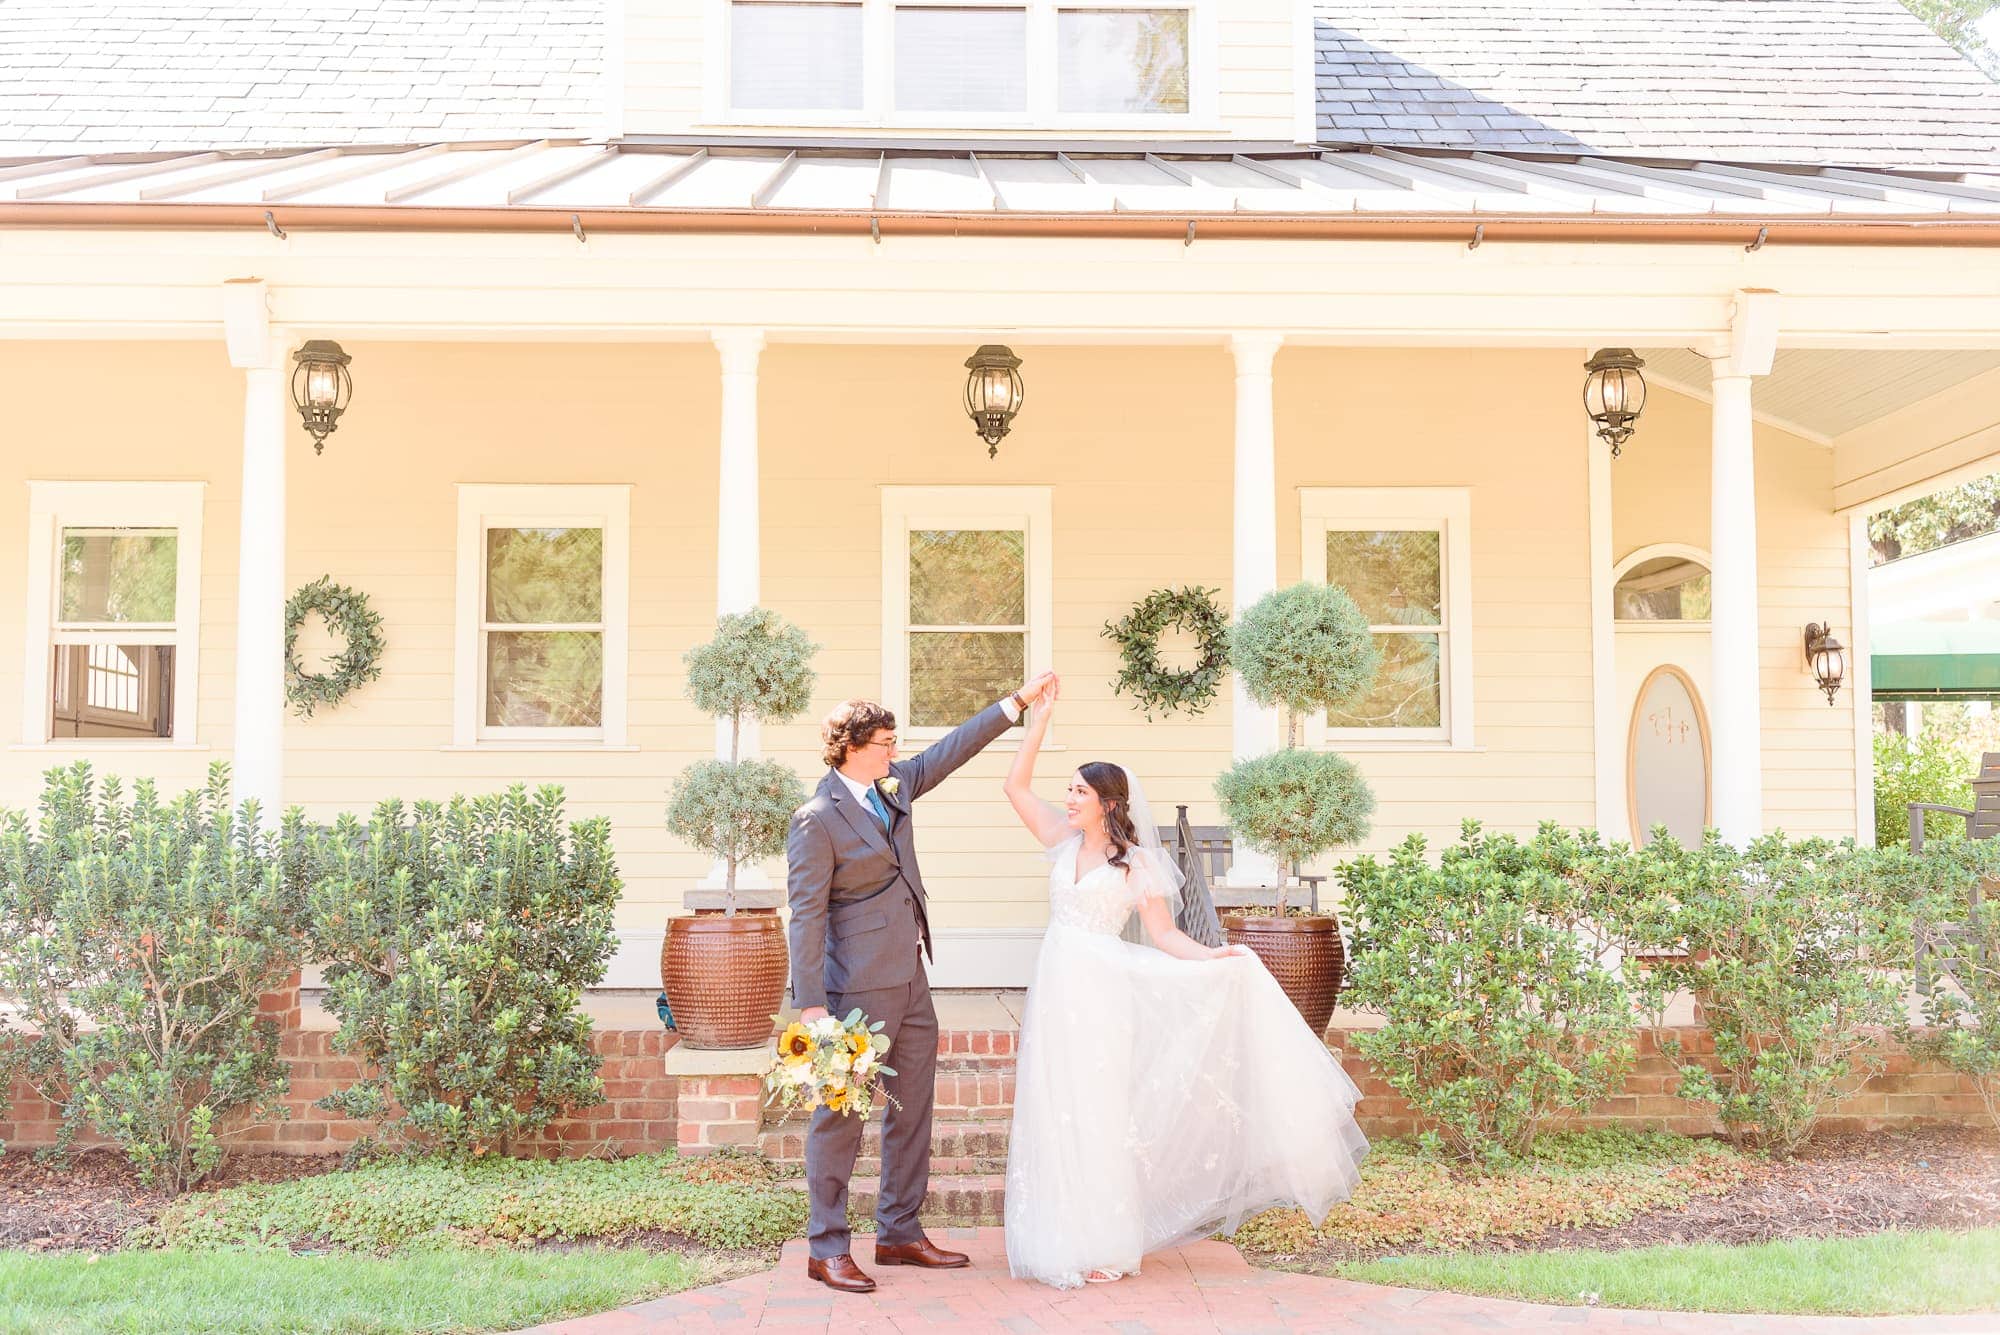 The bride and groom dance together in front of the bridal suite house at Alexander Homestead.